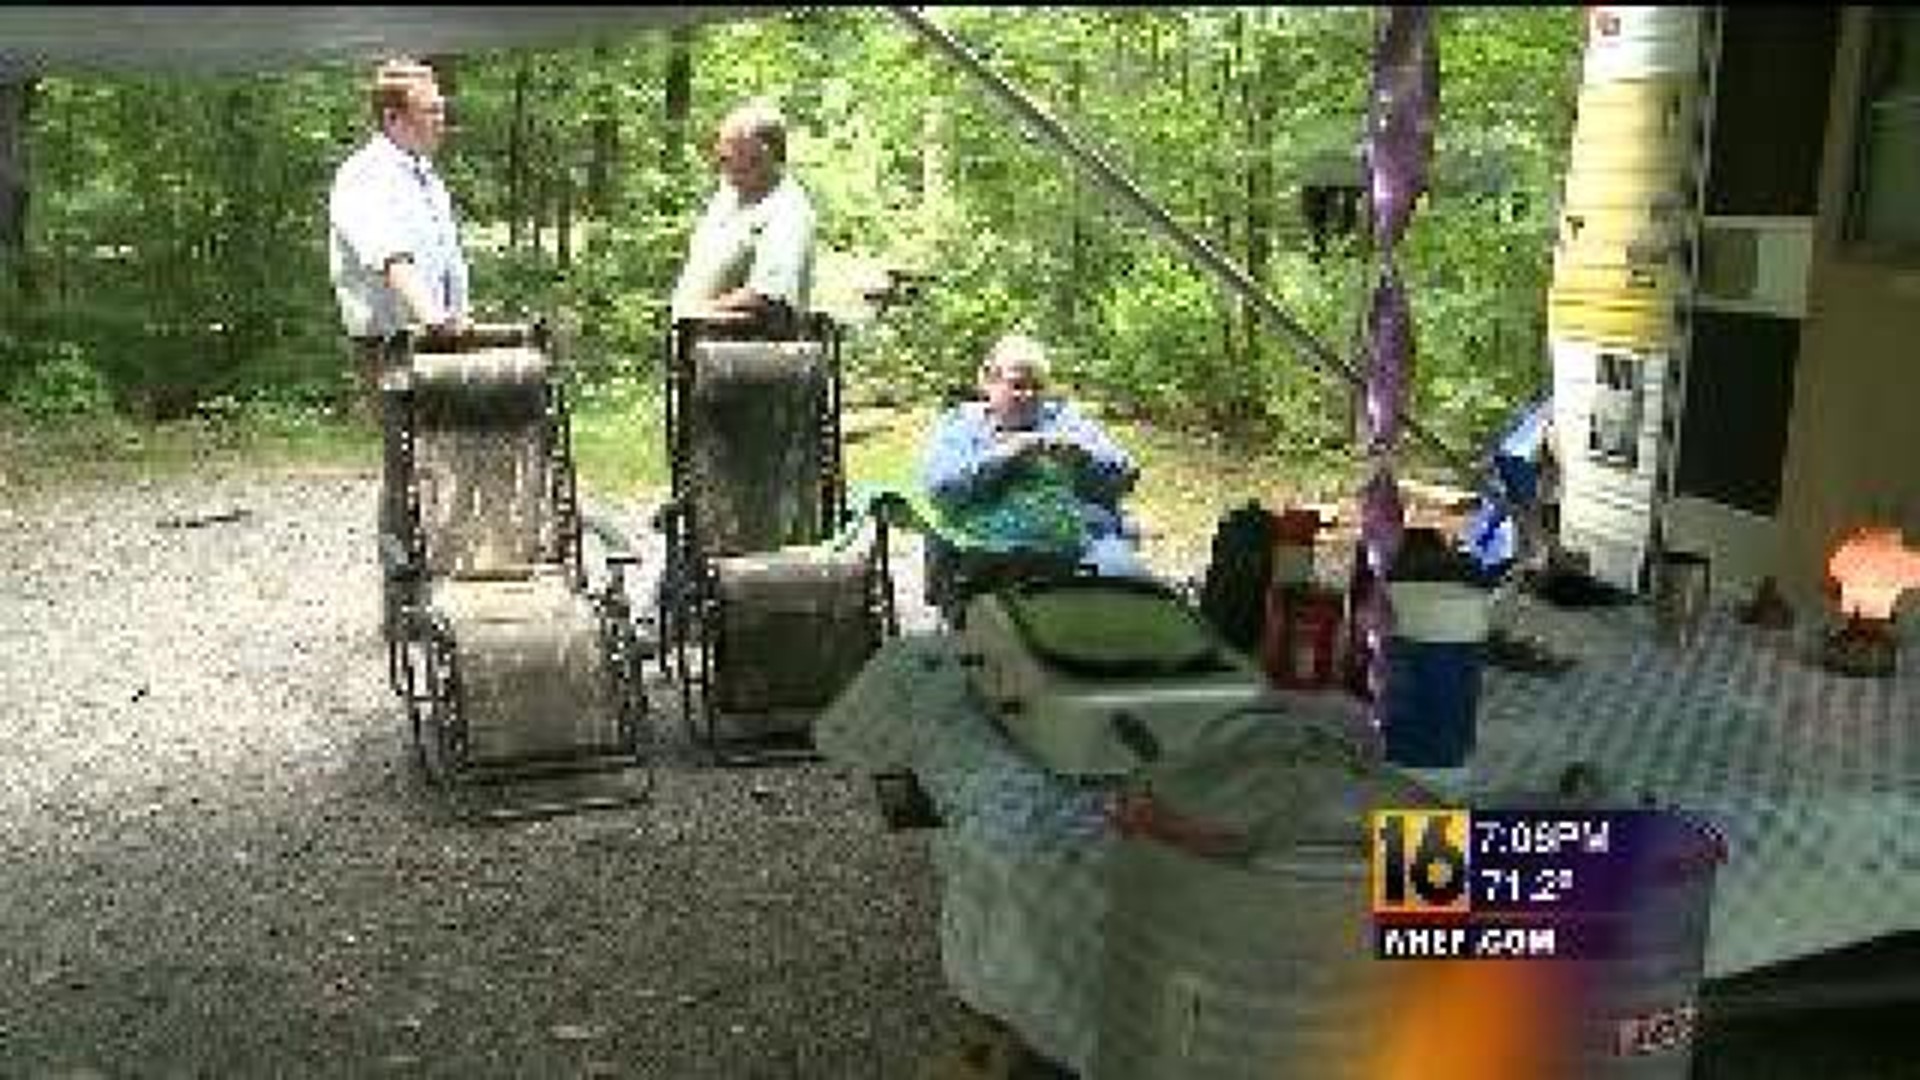 Campers Start Arriving for Holiday Weekend